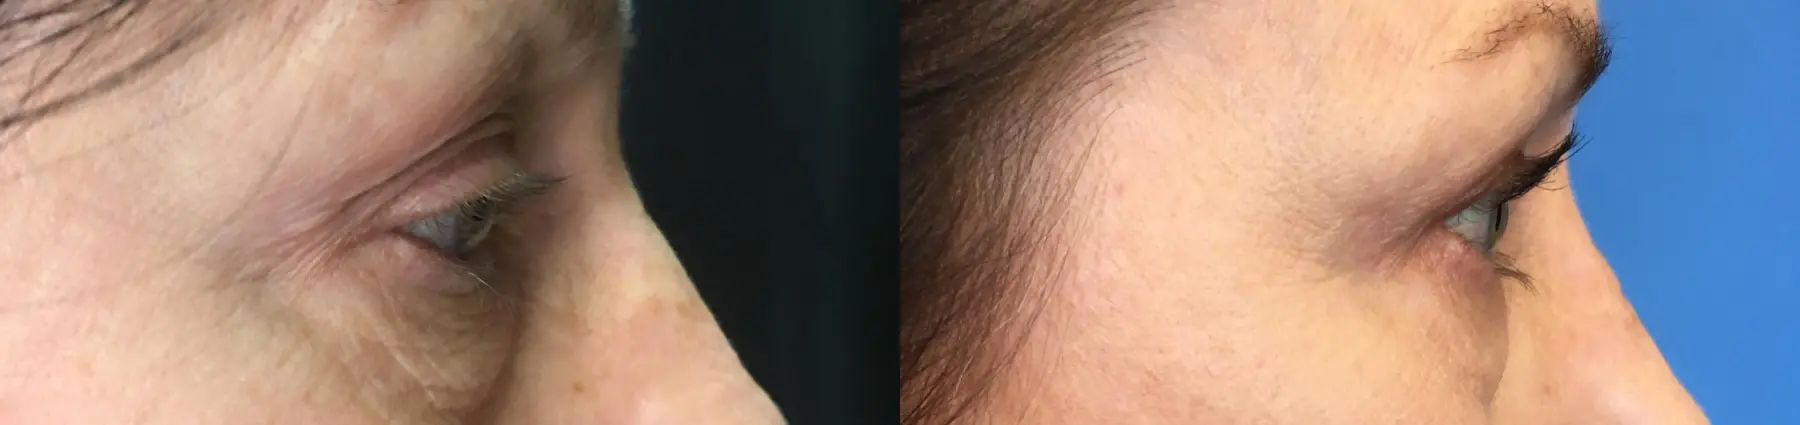 Eyelid Surgery: Patient 24 - Before and After 3